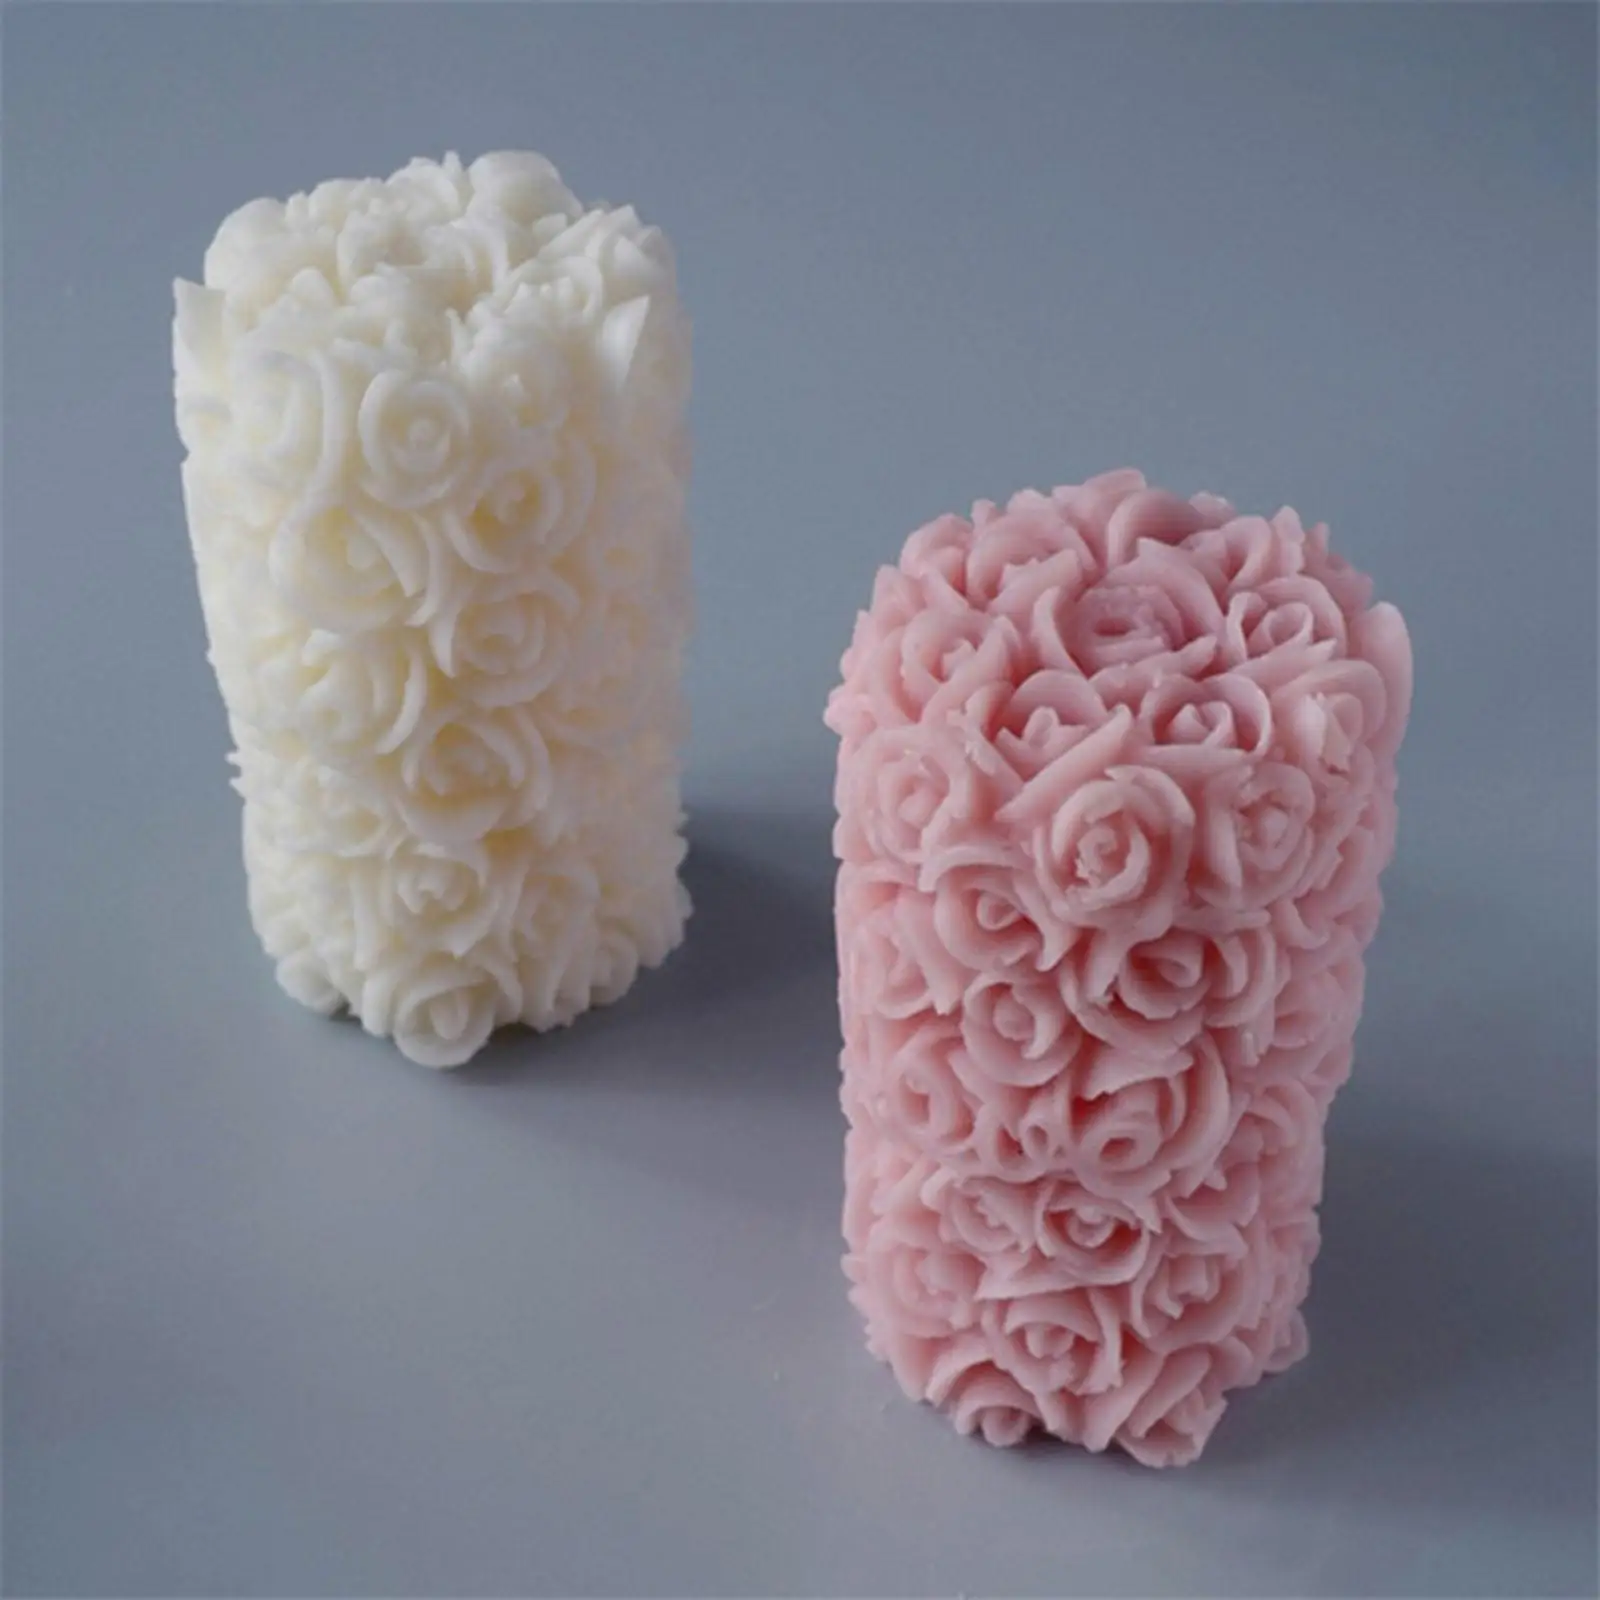 Handmade Rose Flower Candle Mold Resin Casting Plaster Candle Making Mould